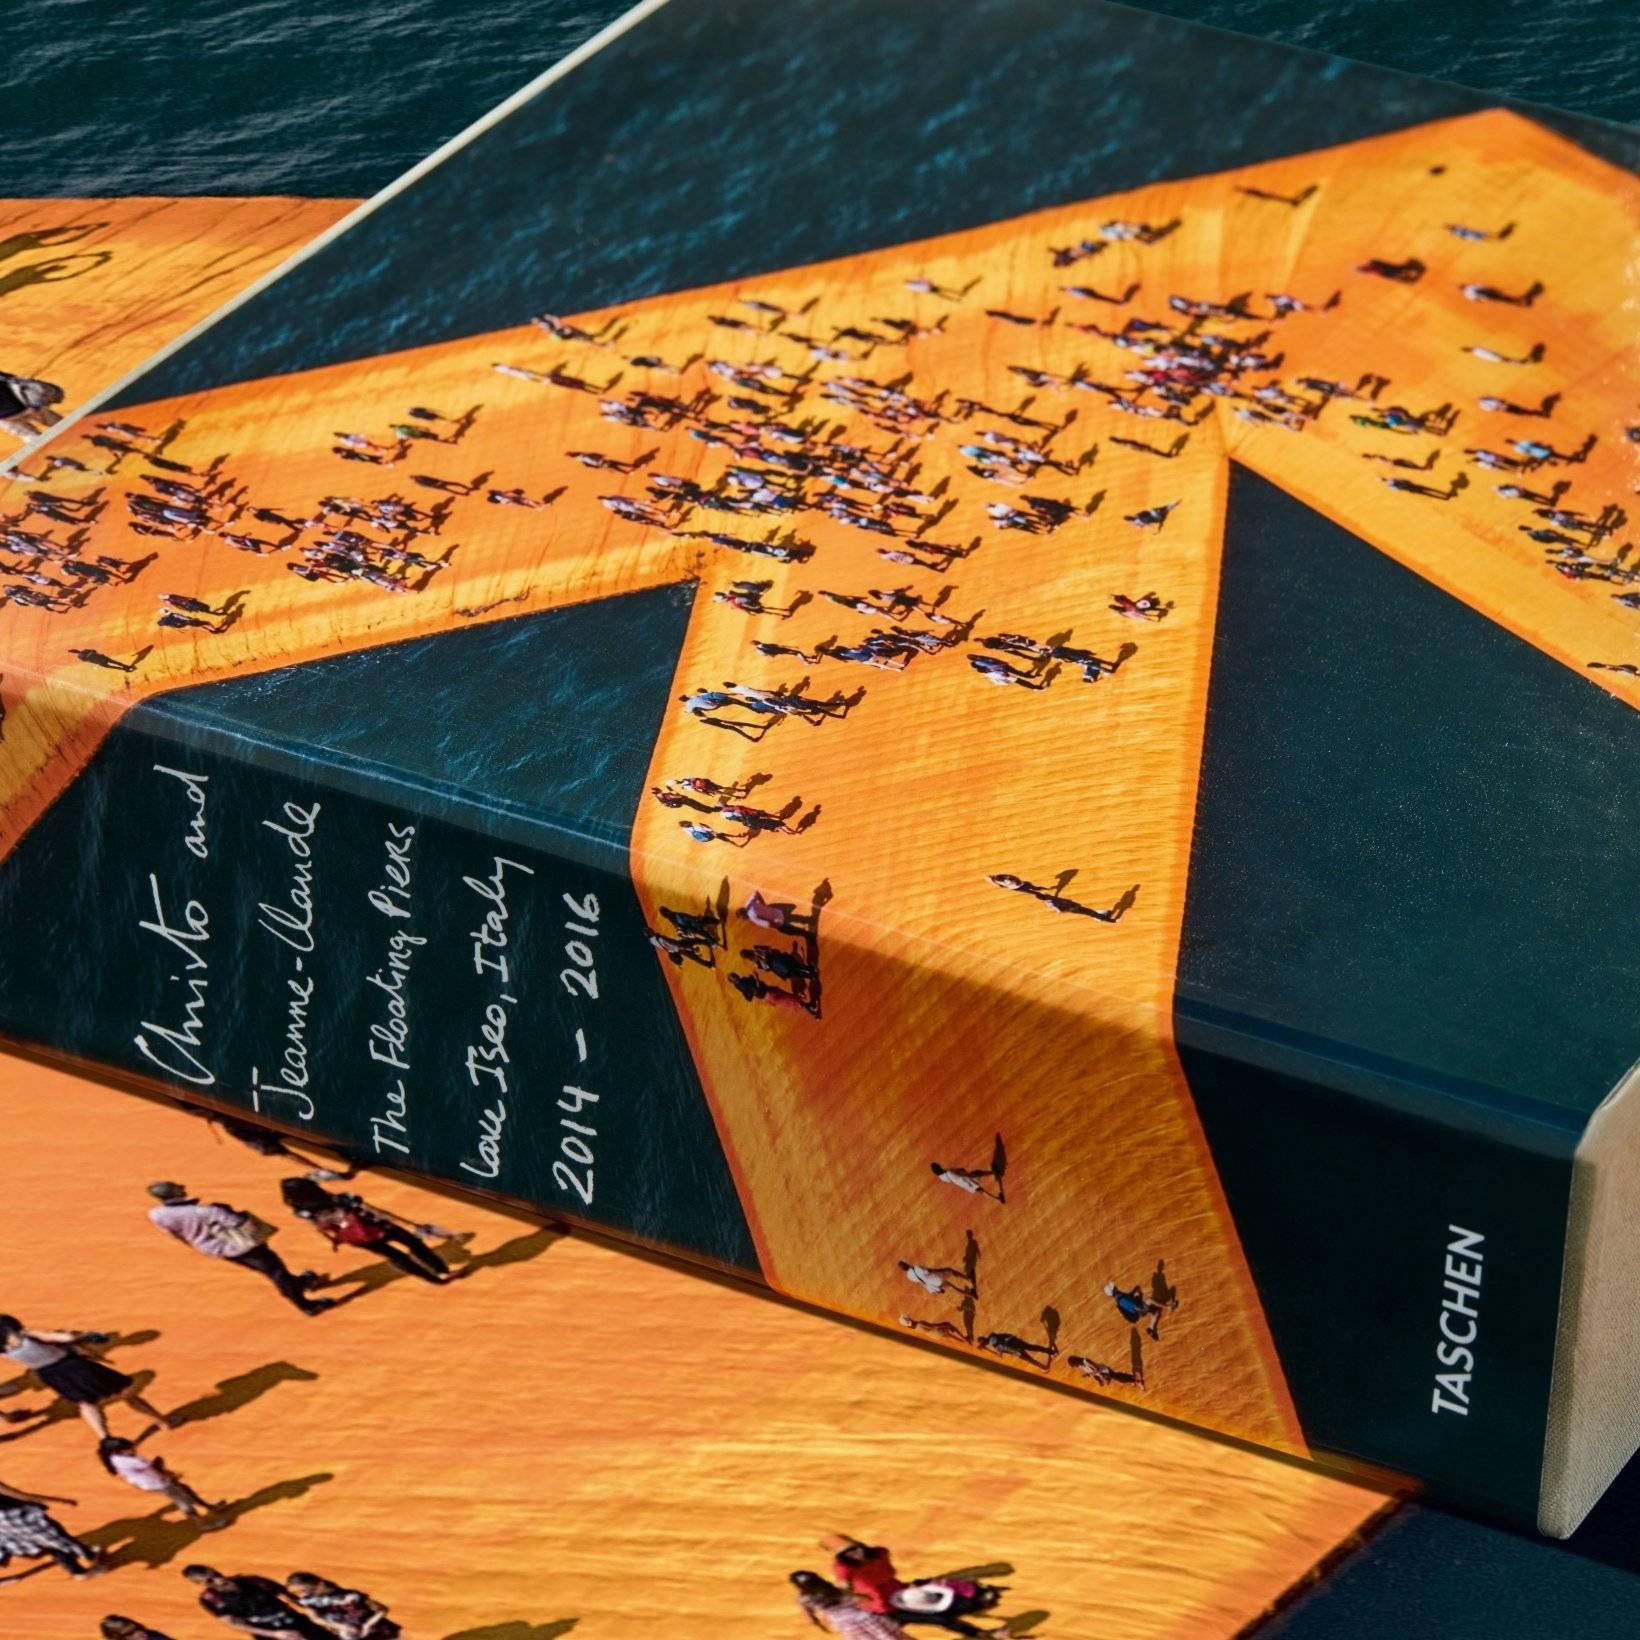 Designed and signed by Christo himself, the artist reveals the complete story of his and Jeanne-Claude’s extraordinary The Floating Piers of June–July 2016. On 846 pages, the artist presents preparatory drawings and collages, as well as important